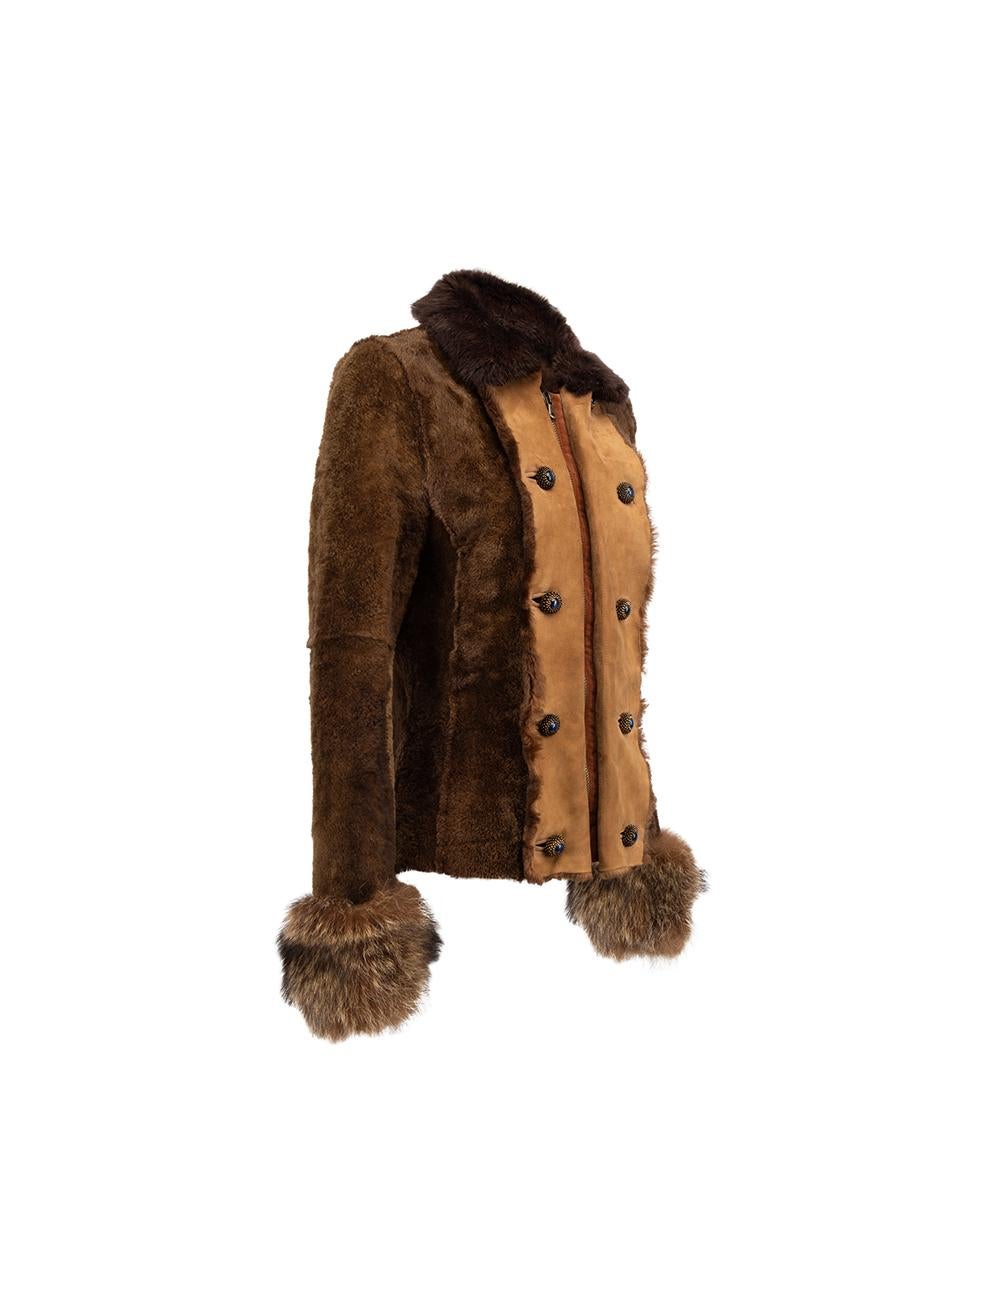 CONDITION is Very good. Minimal wear to jacket is evident. Minimal wear to the general texture of the fur due to age on this used Dolce & Gabbana designer resale item.



Details


Brown

Lamb fur

Fitted jacket

Front zip closure

Double breasted